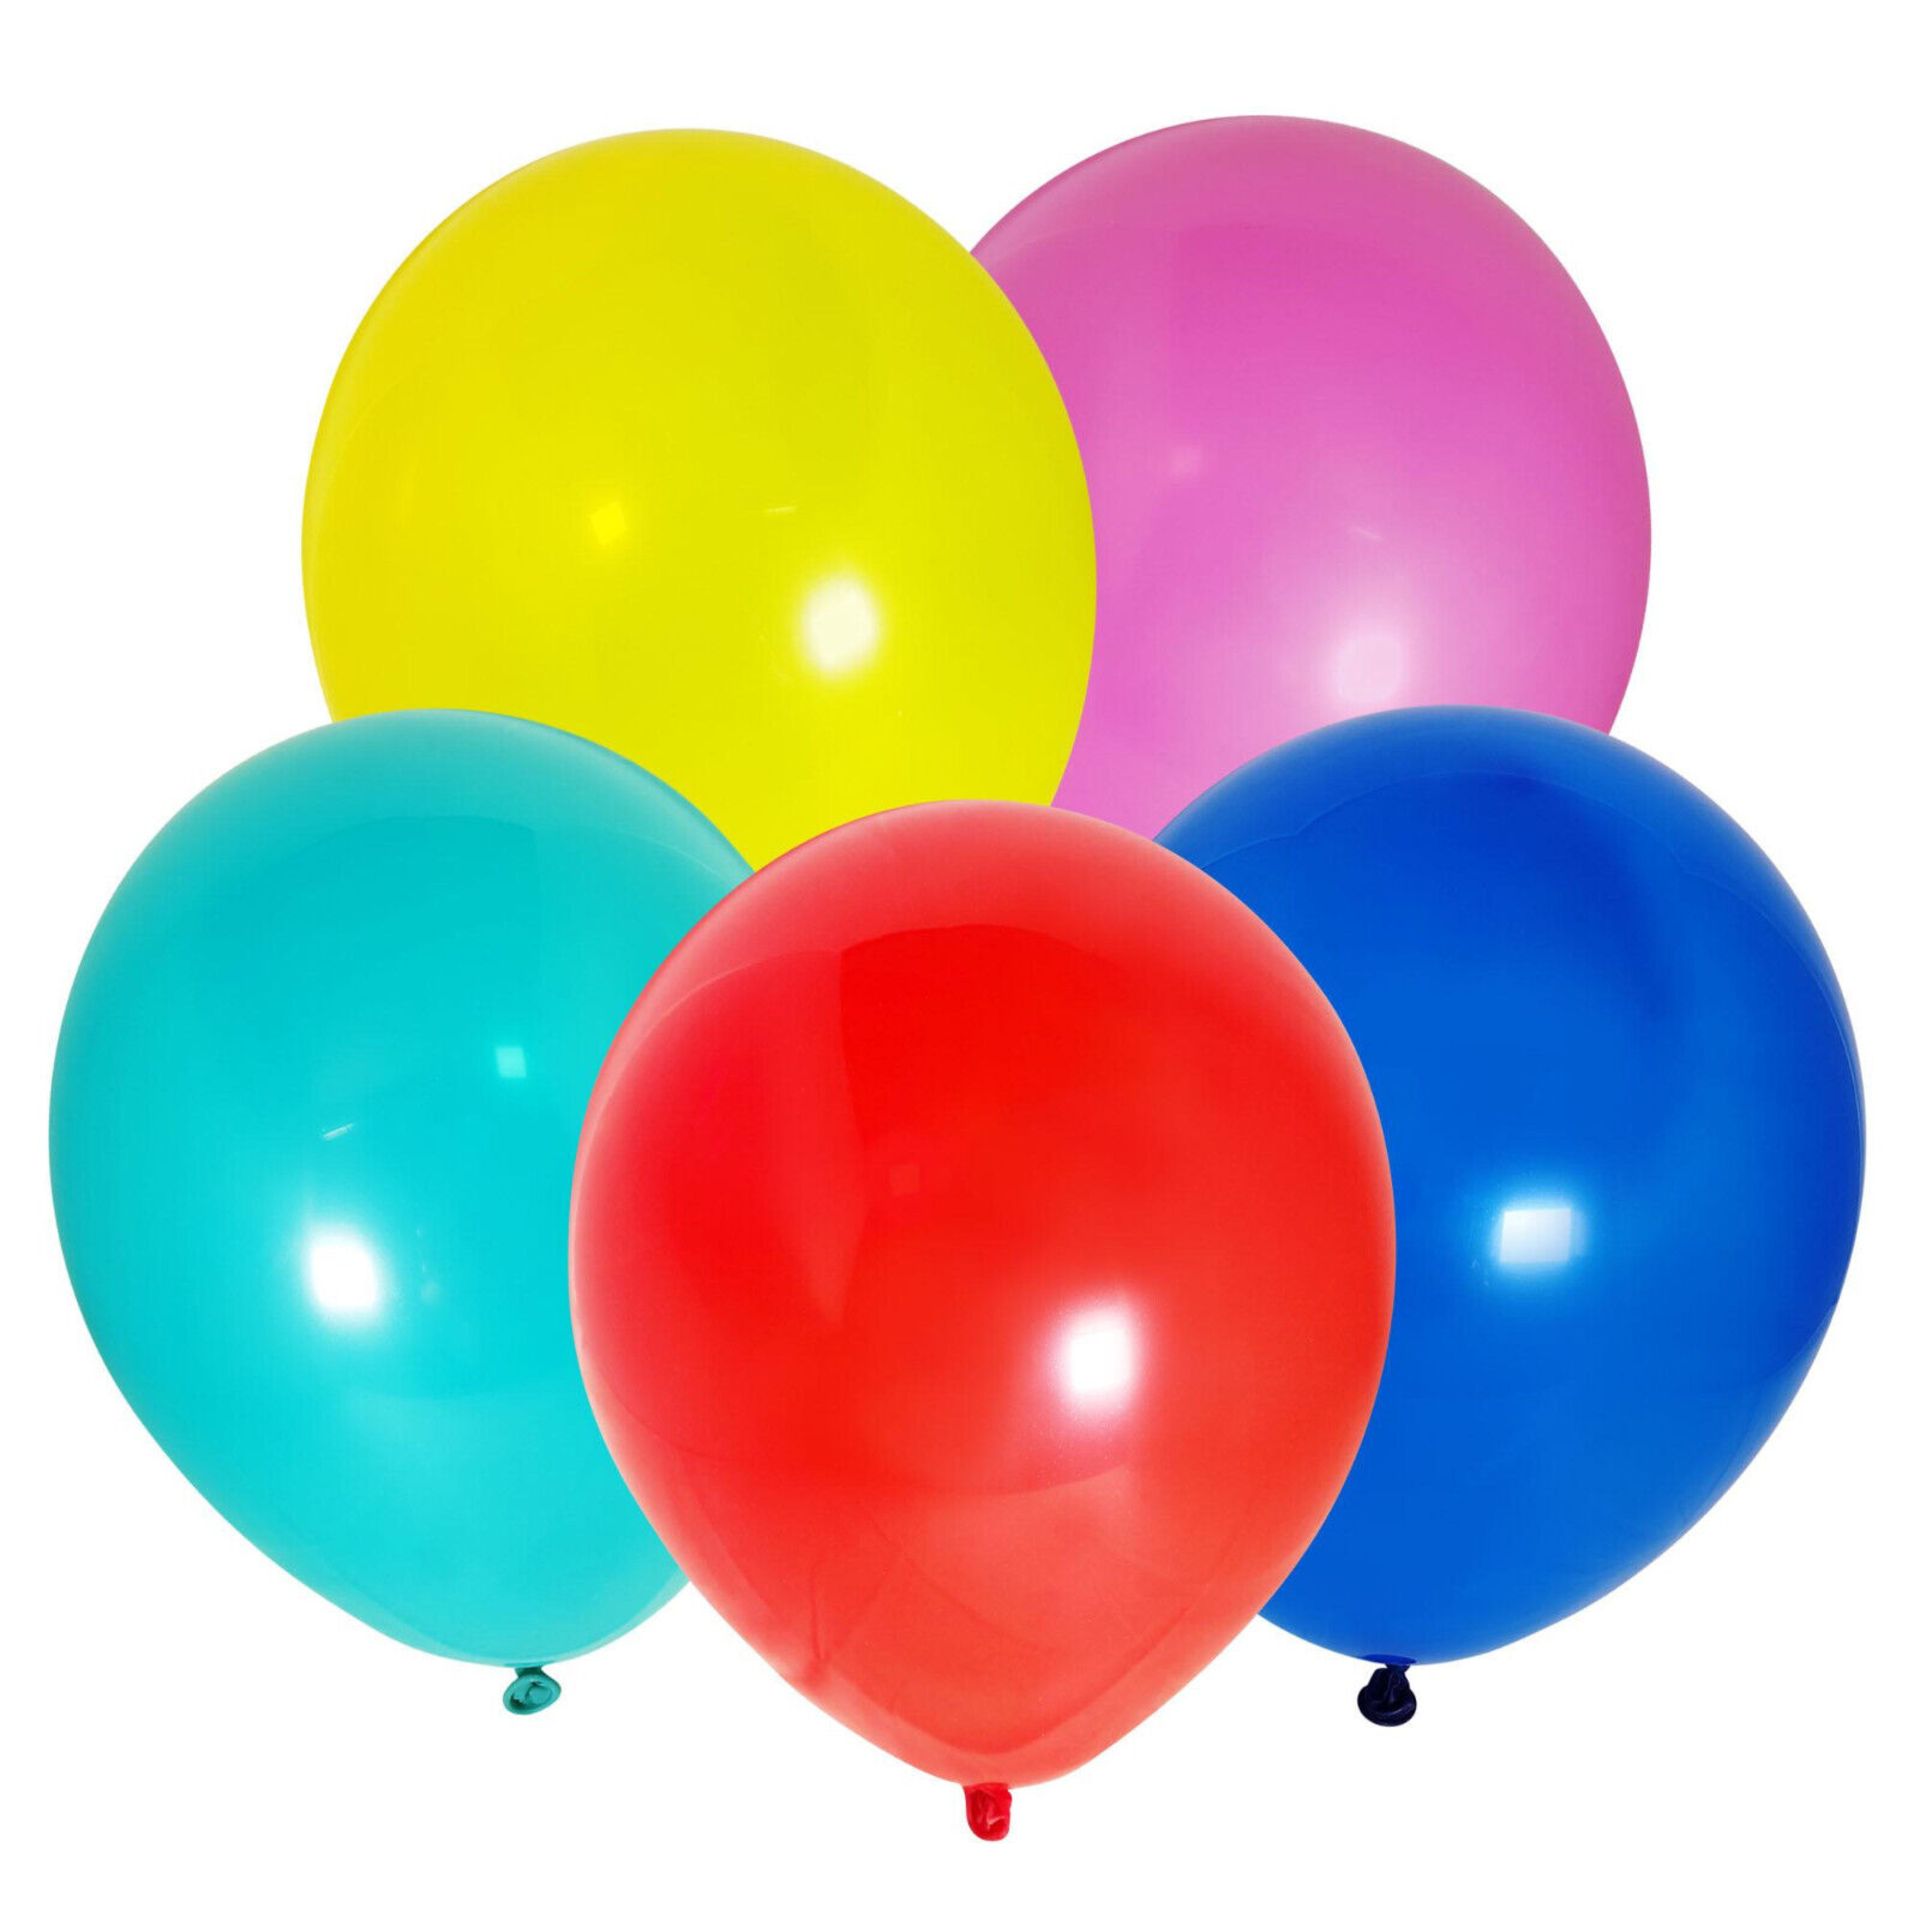 100 X NEW 9"&6" - 24 PACK ASSORTED COLOURED BALLOONS - Image 4 of 4